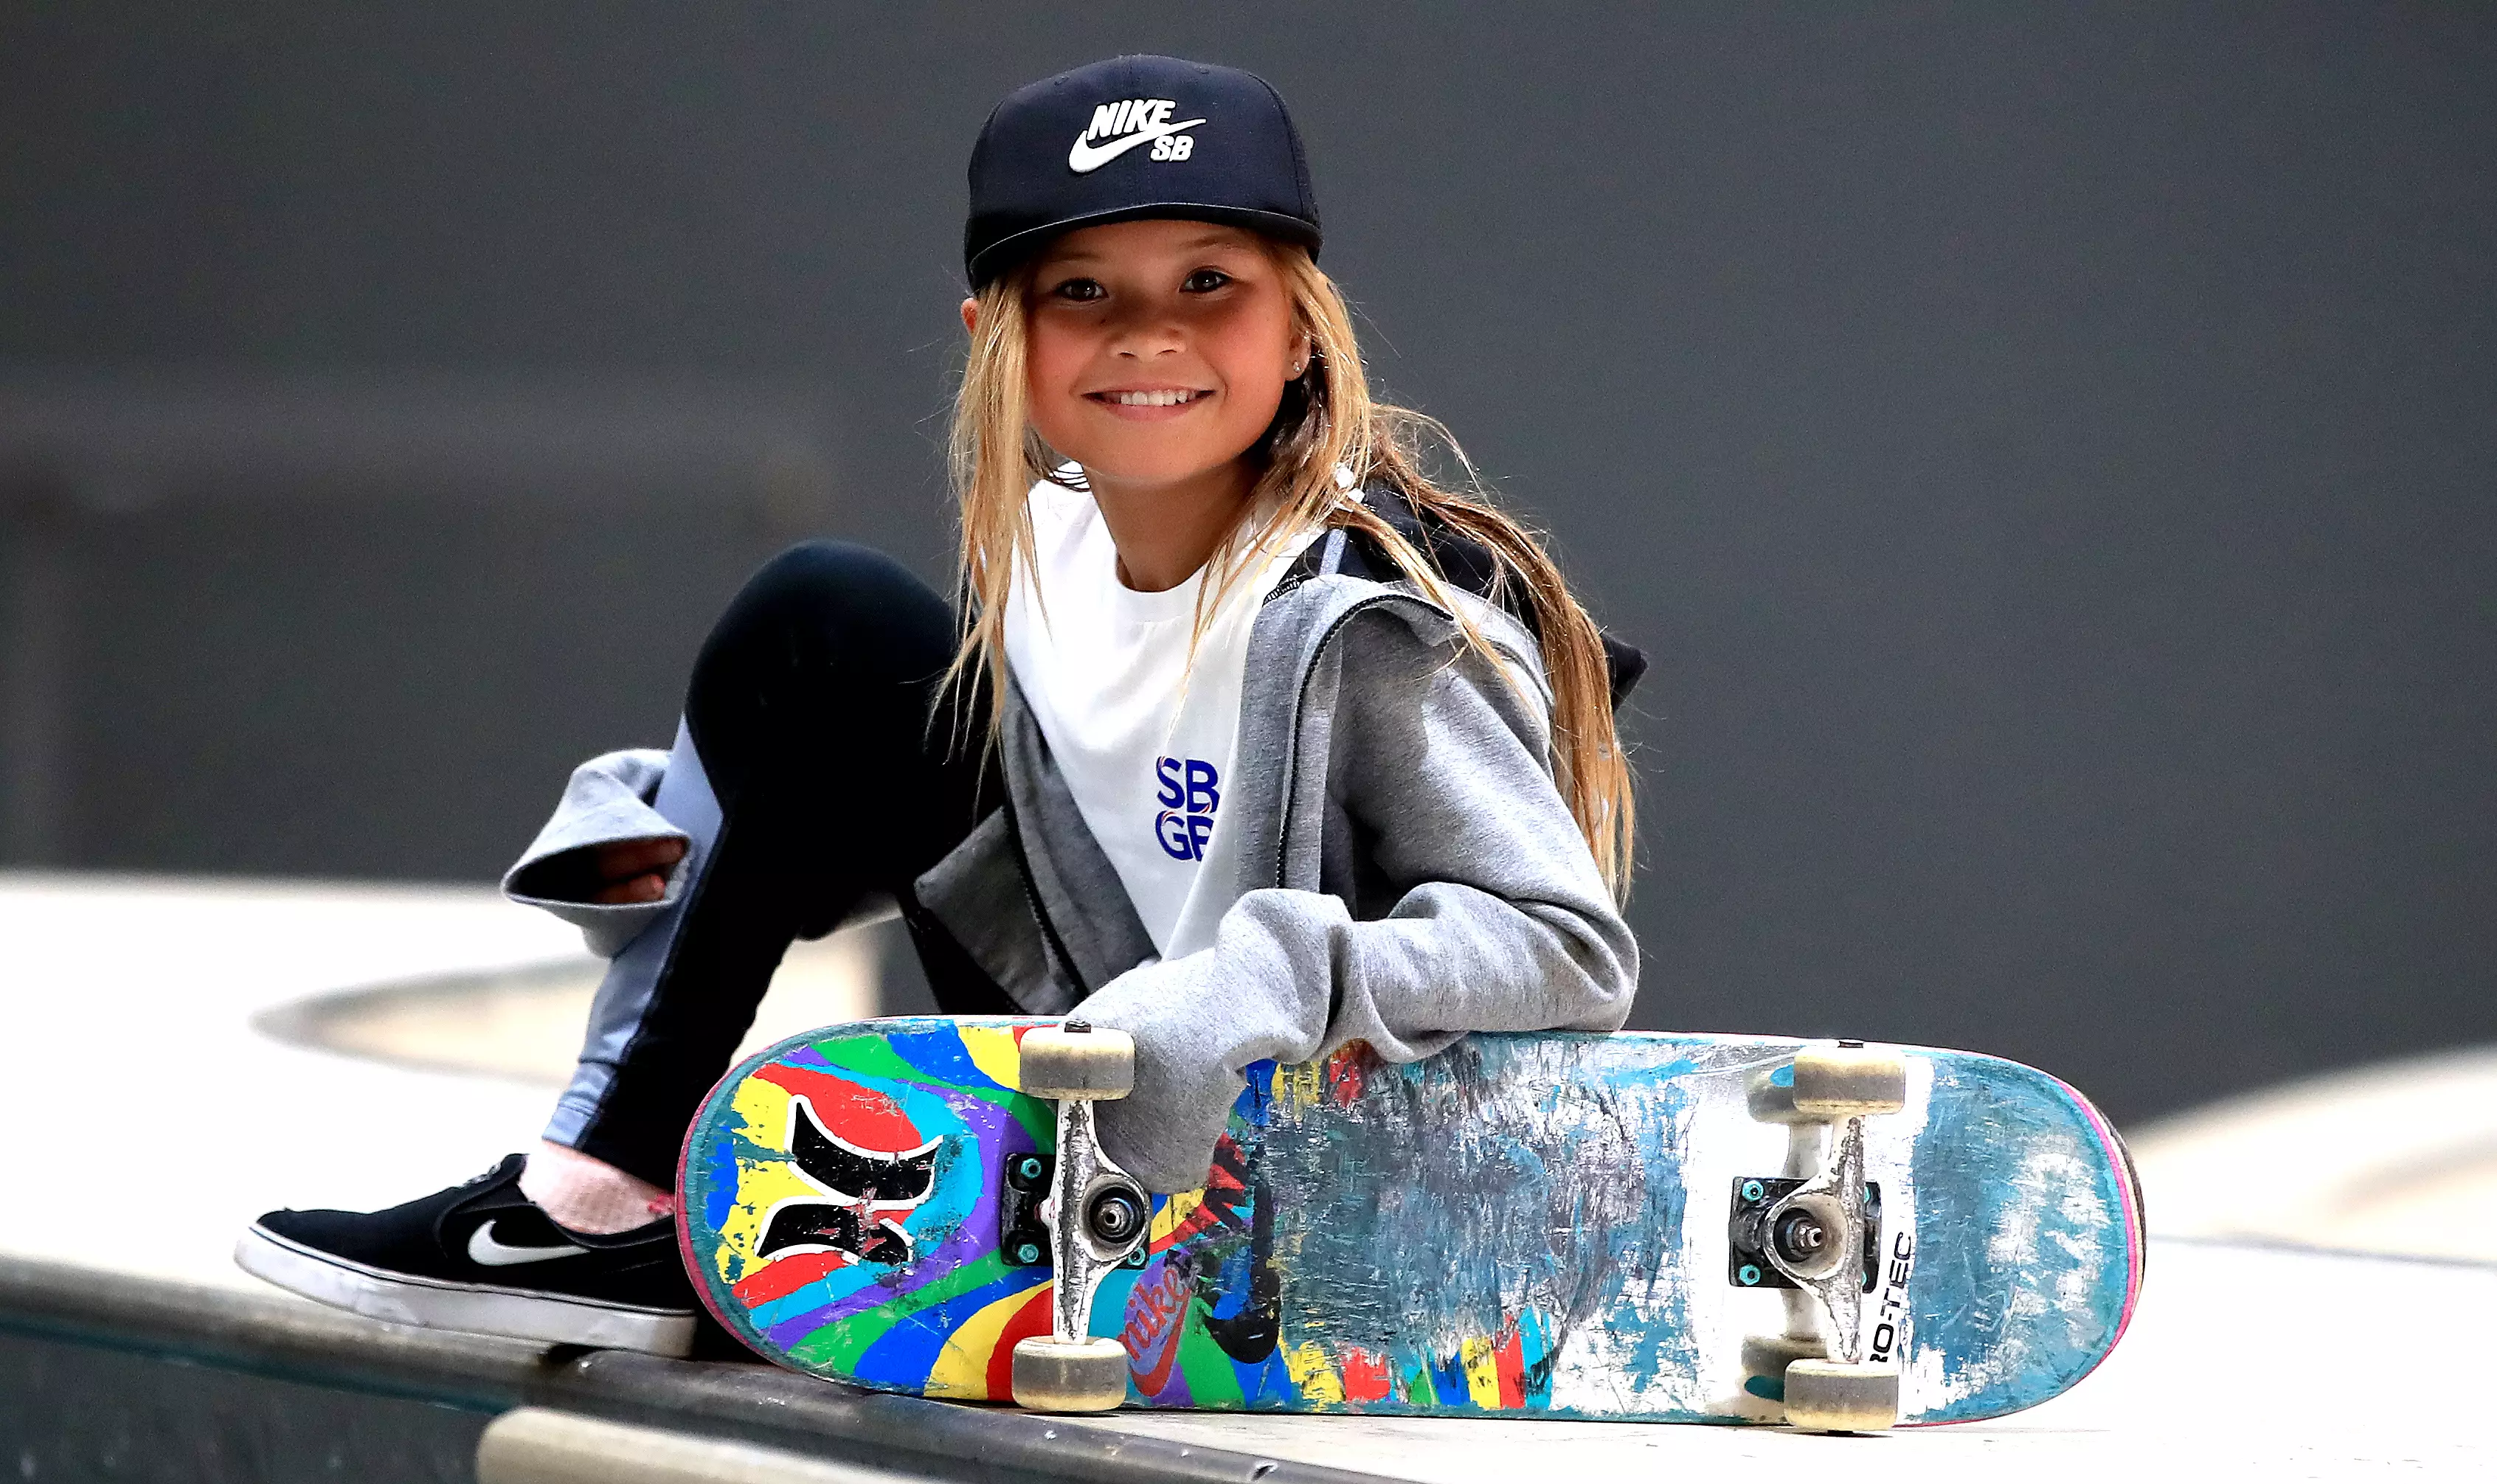 Sky Brown, age 10, during the Skateboard GB Team Announcement at the Graystone Action Academy, Manchester in 2019. (